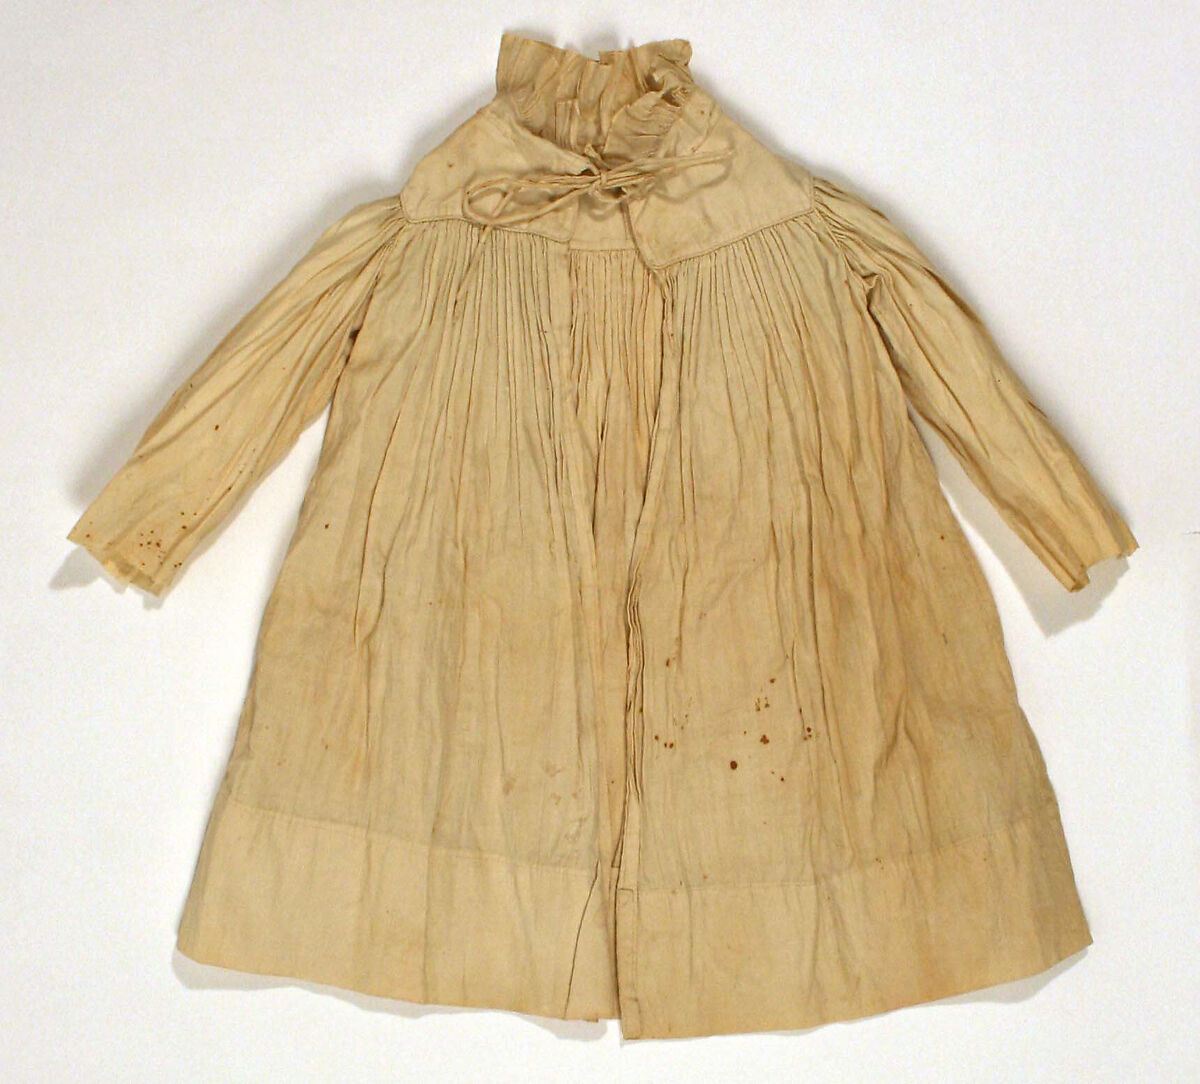 Robe, cotton, probably American 